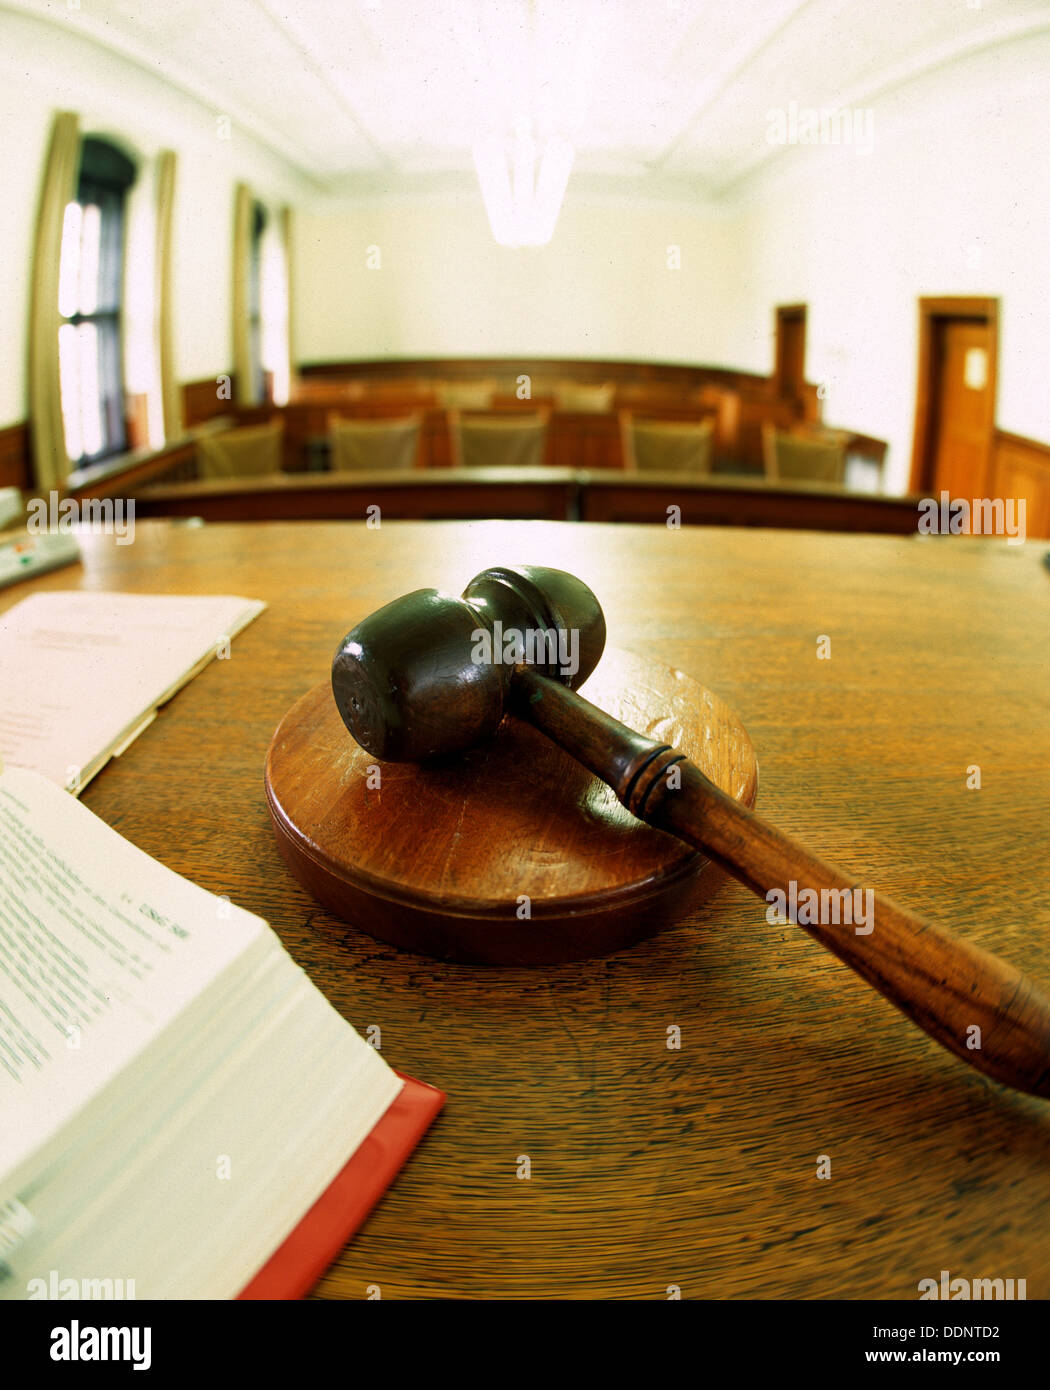 Gavel in a courtroom Stock Photo